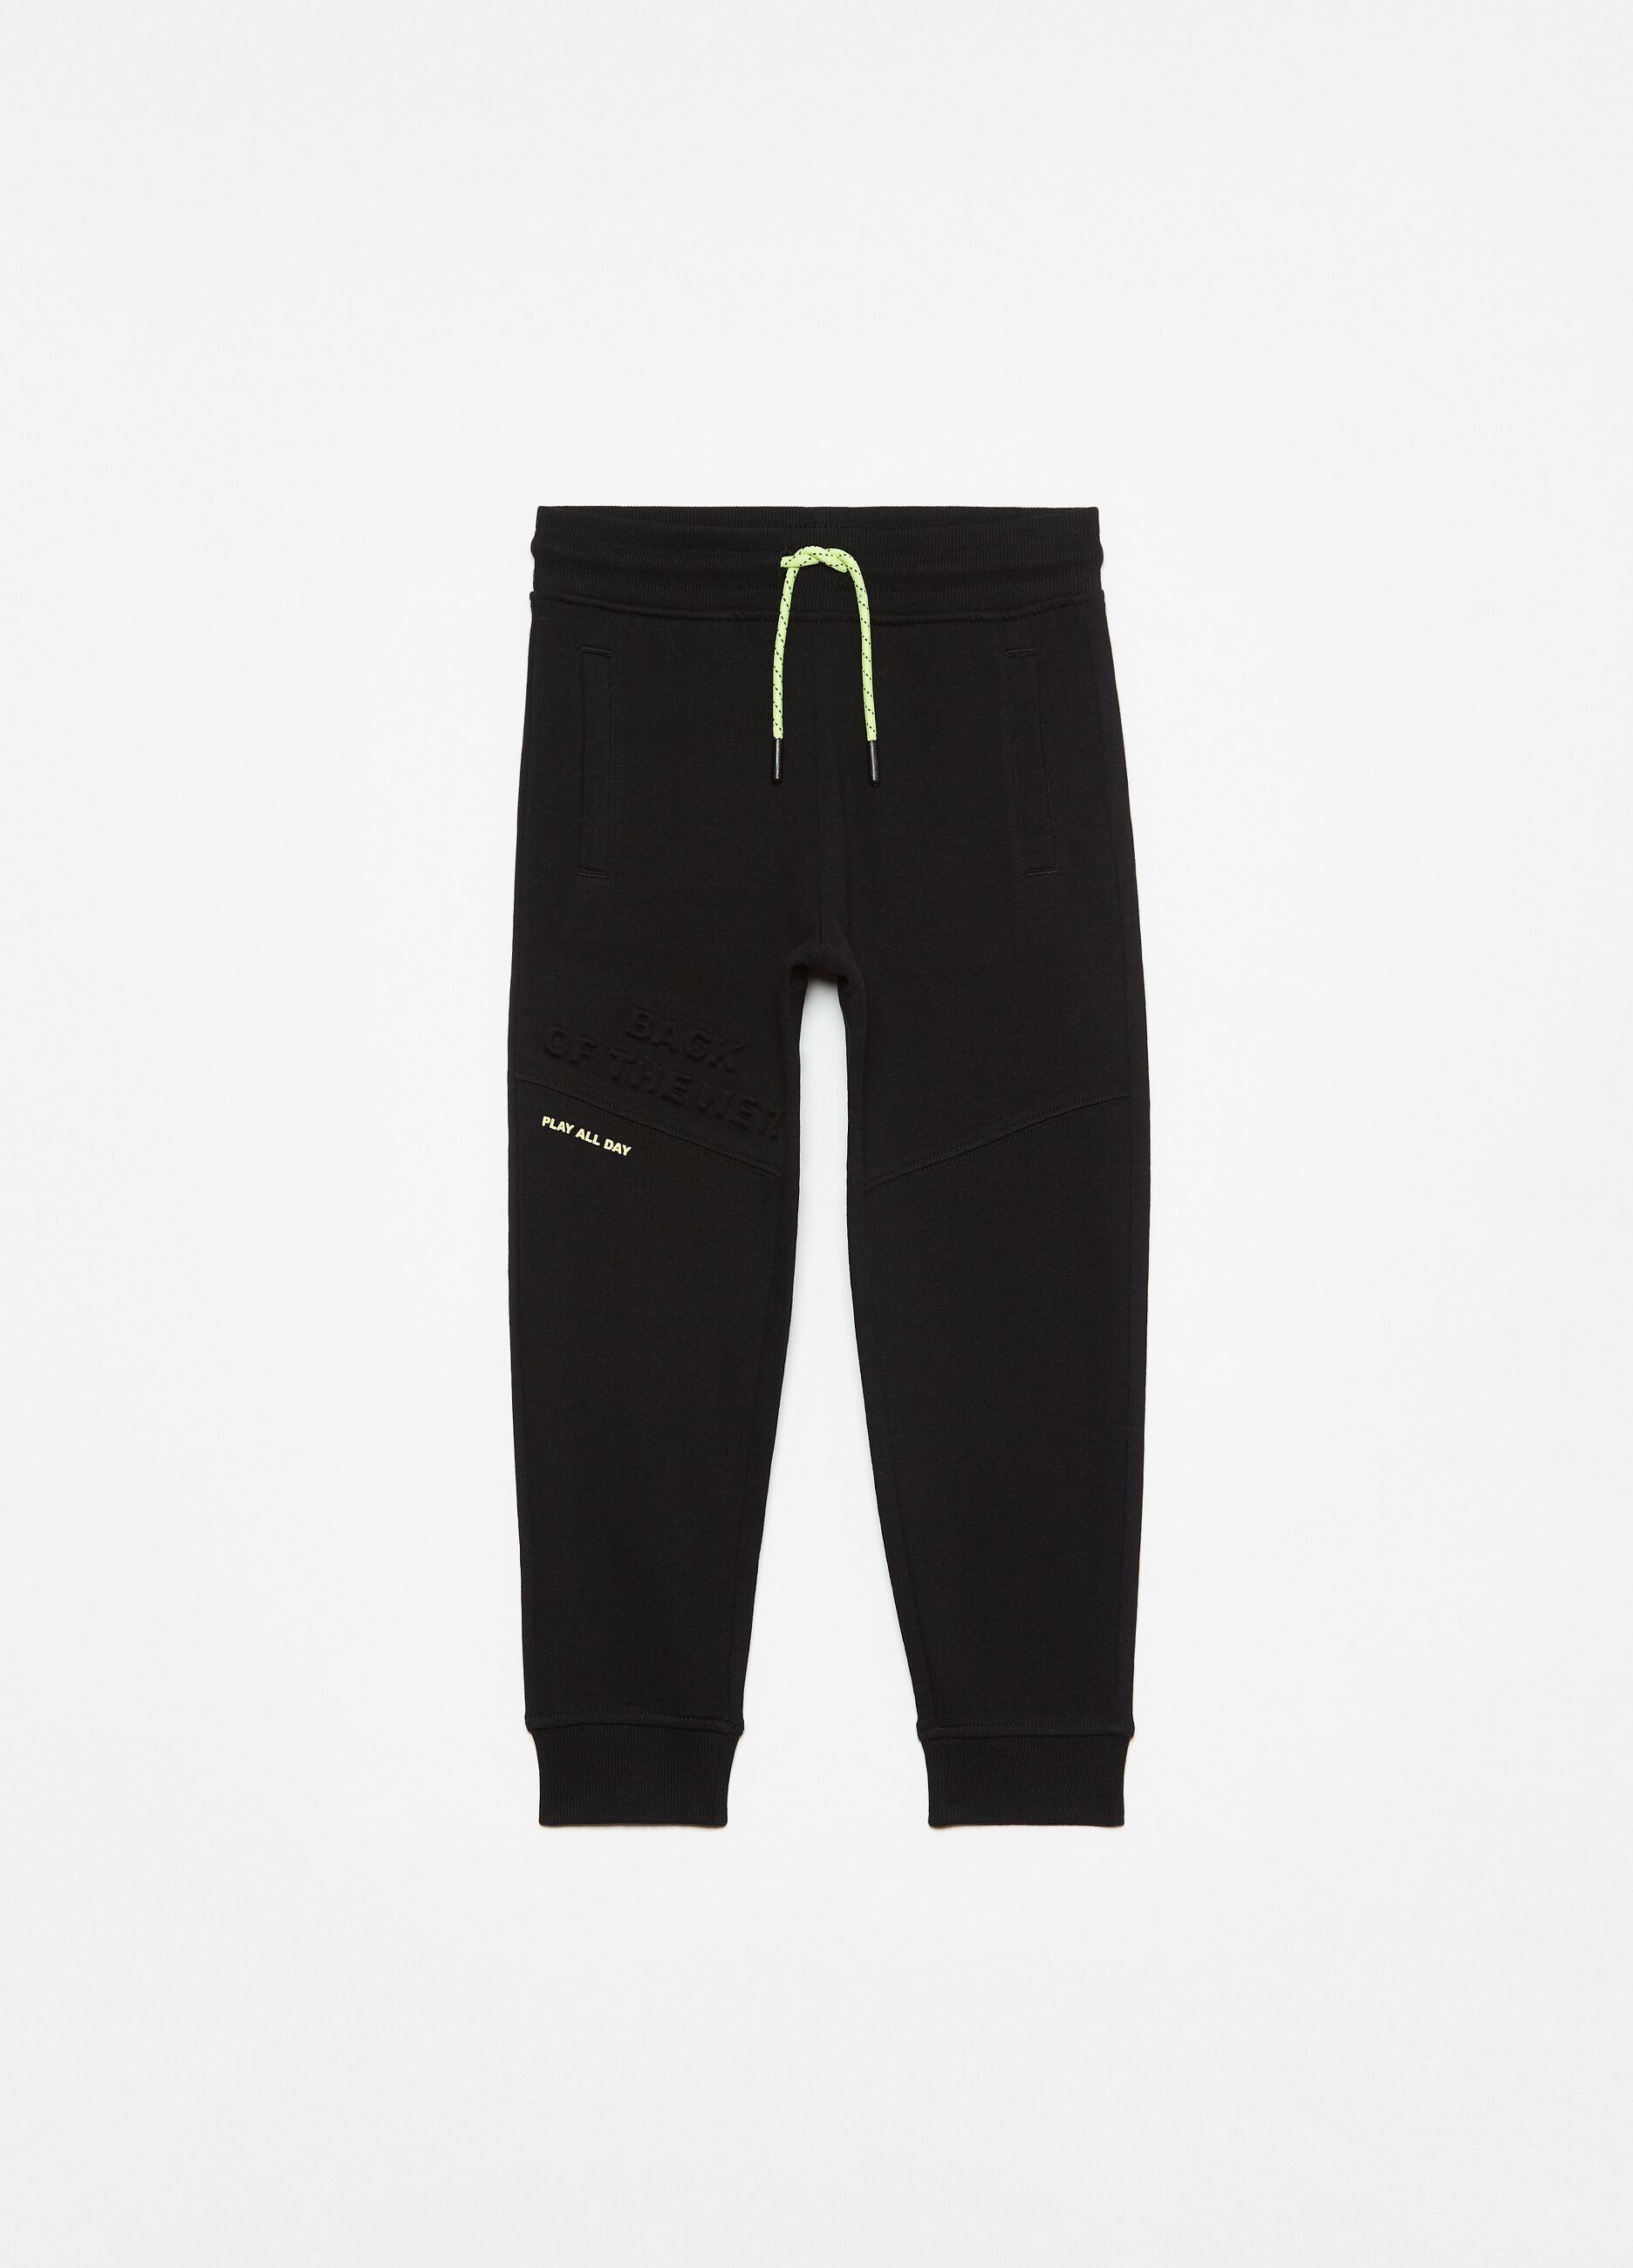 French terry joggers with raised lettering